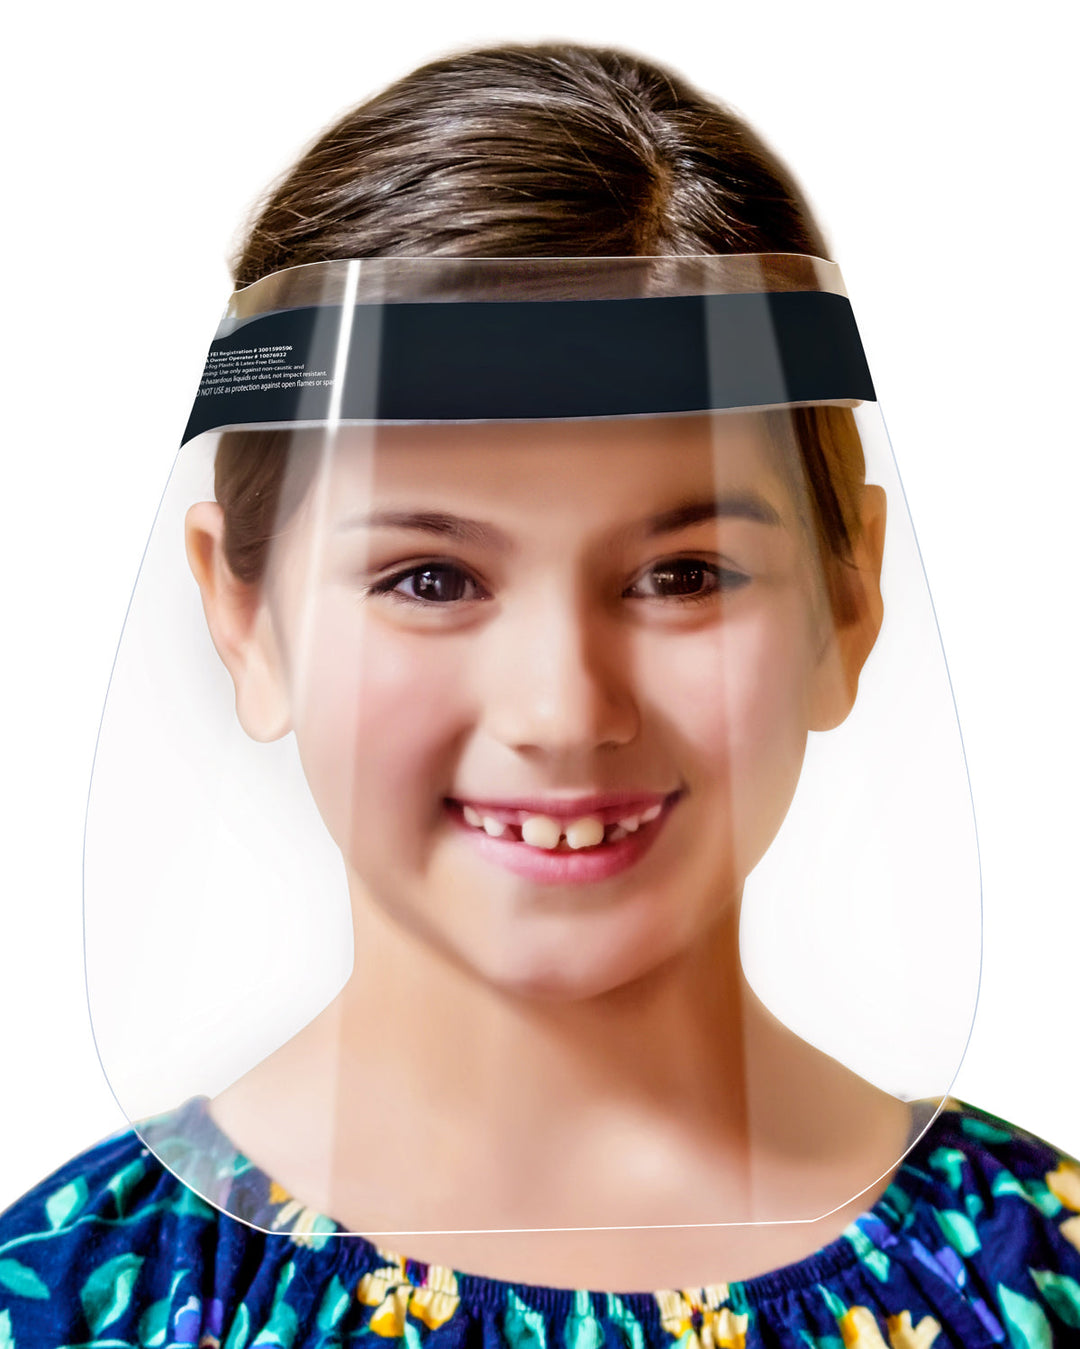 60-Pack Children's Safety Face Shields - Anti-Fog, Anti-Static, Hypoallergenic (Animal Kingdom, 6/Bag, 10/Case, 60 Pieces)